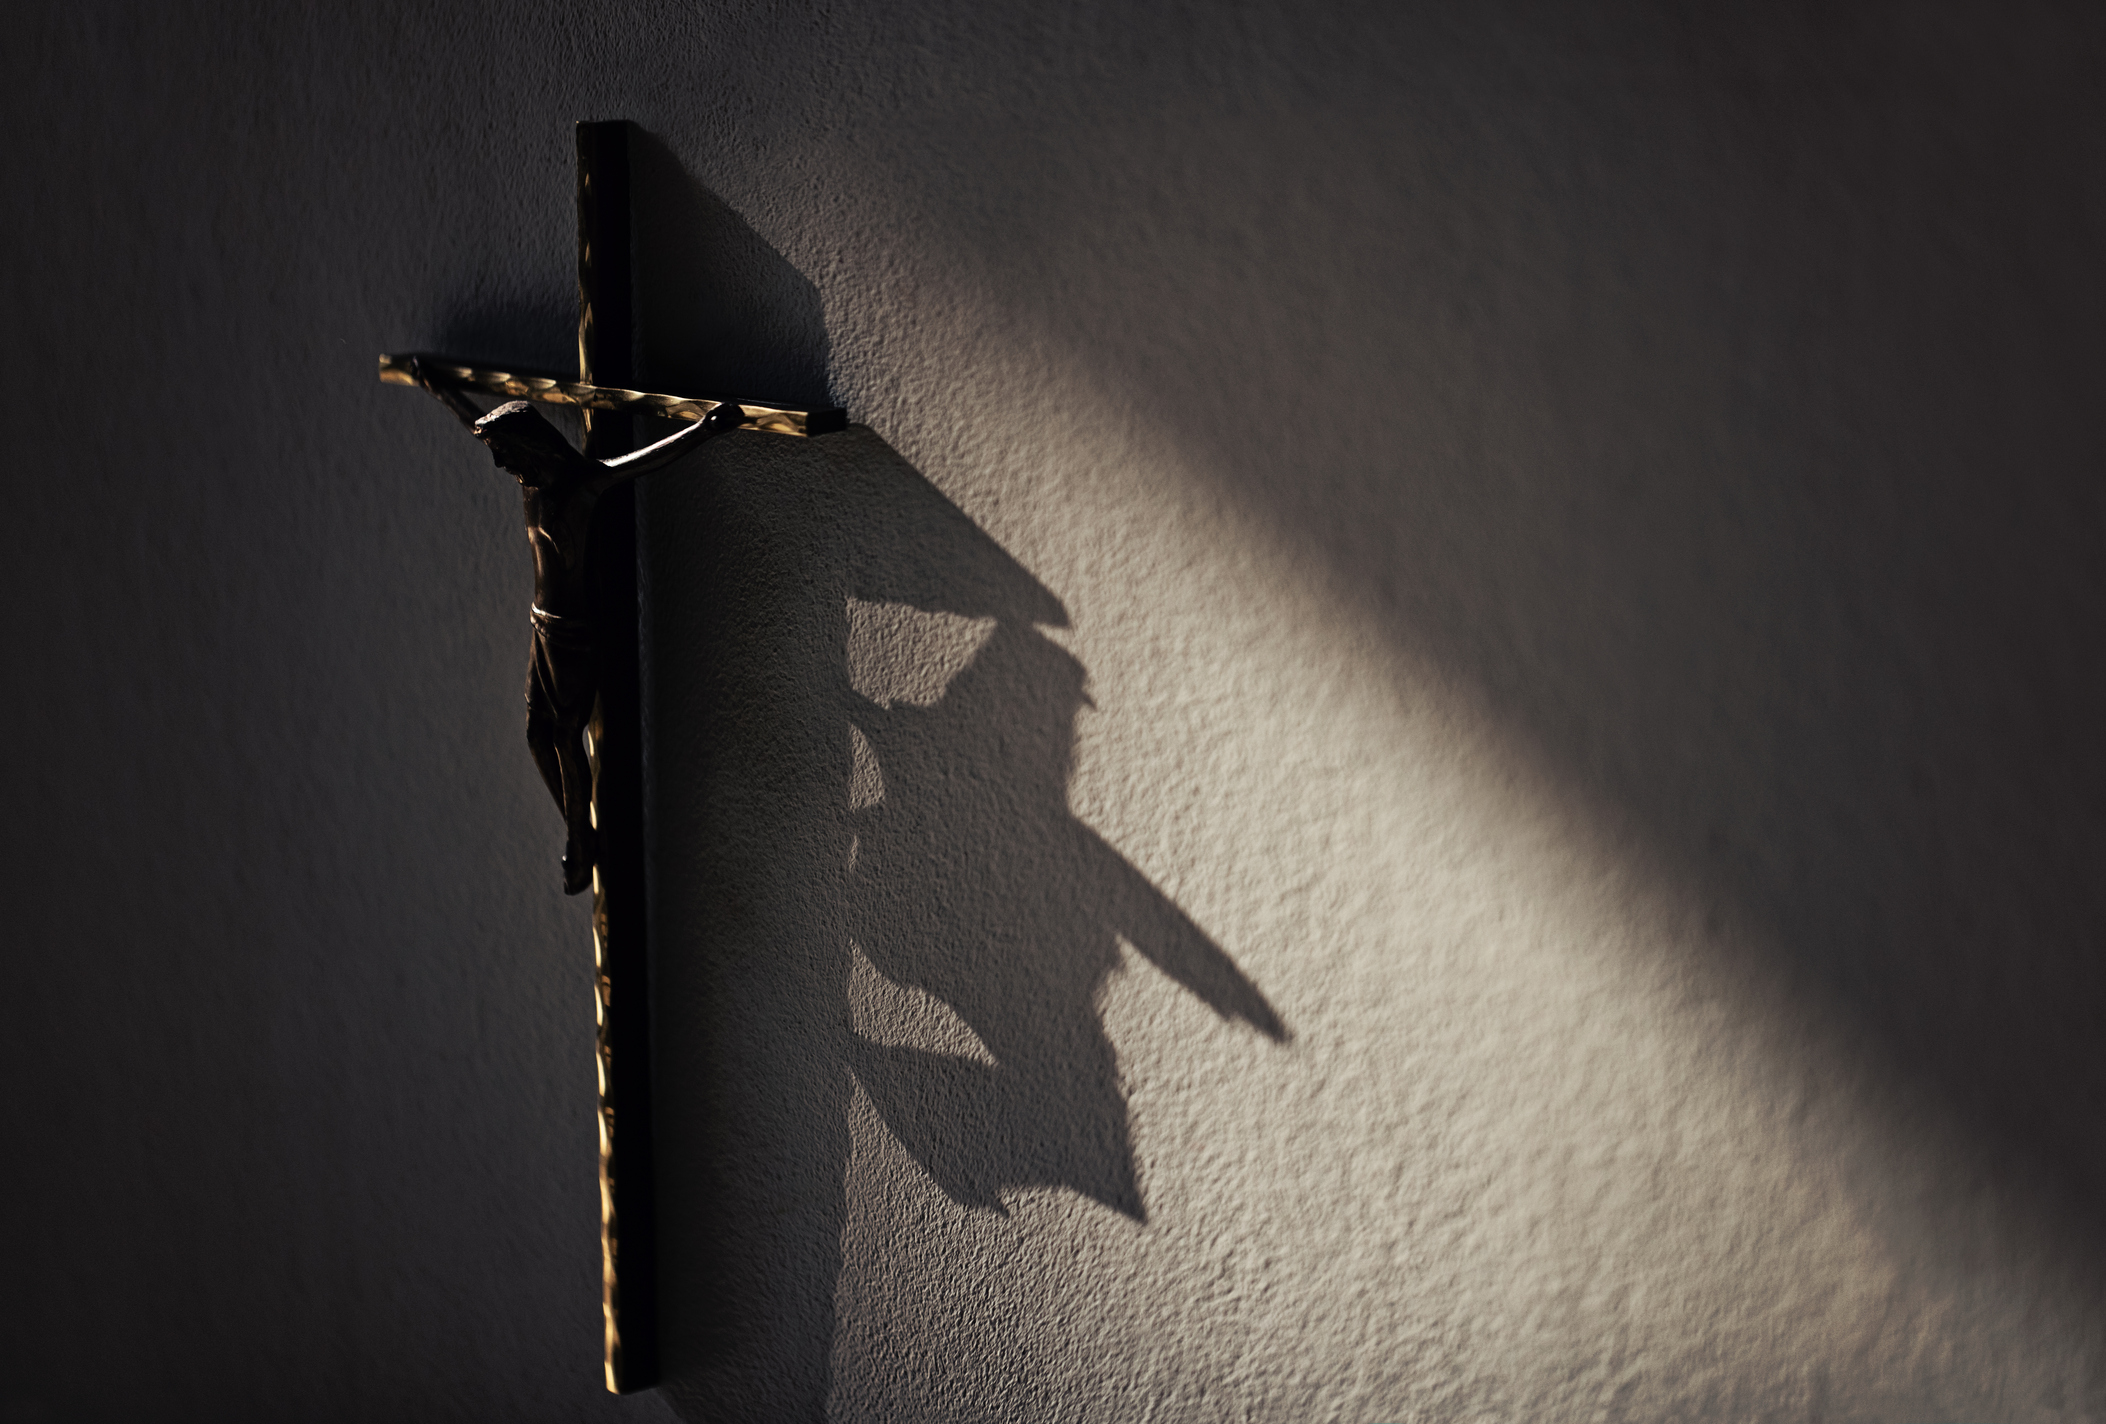 Crucifix on the wall - stock photo